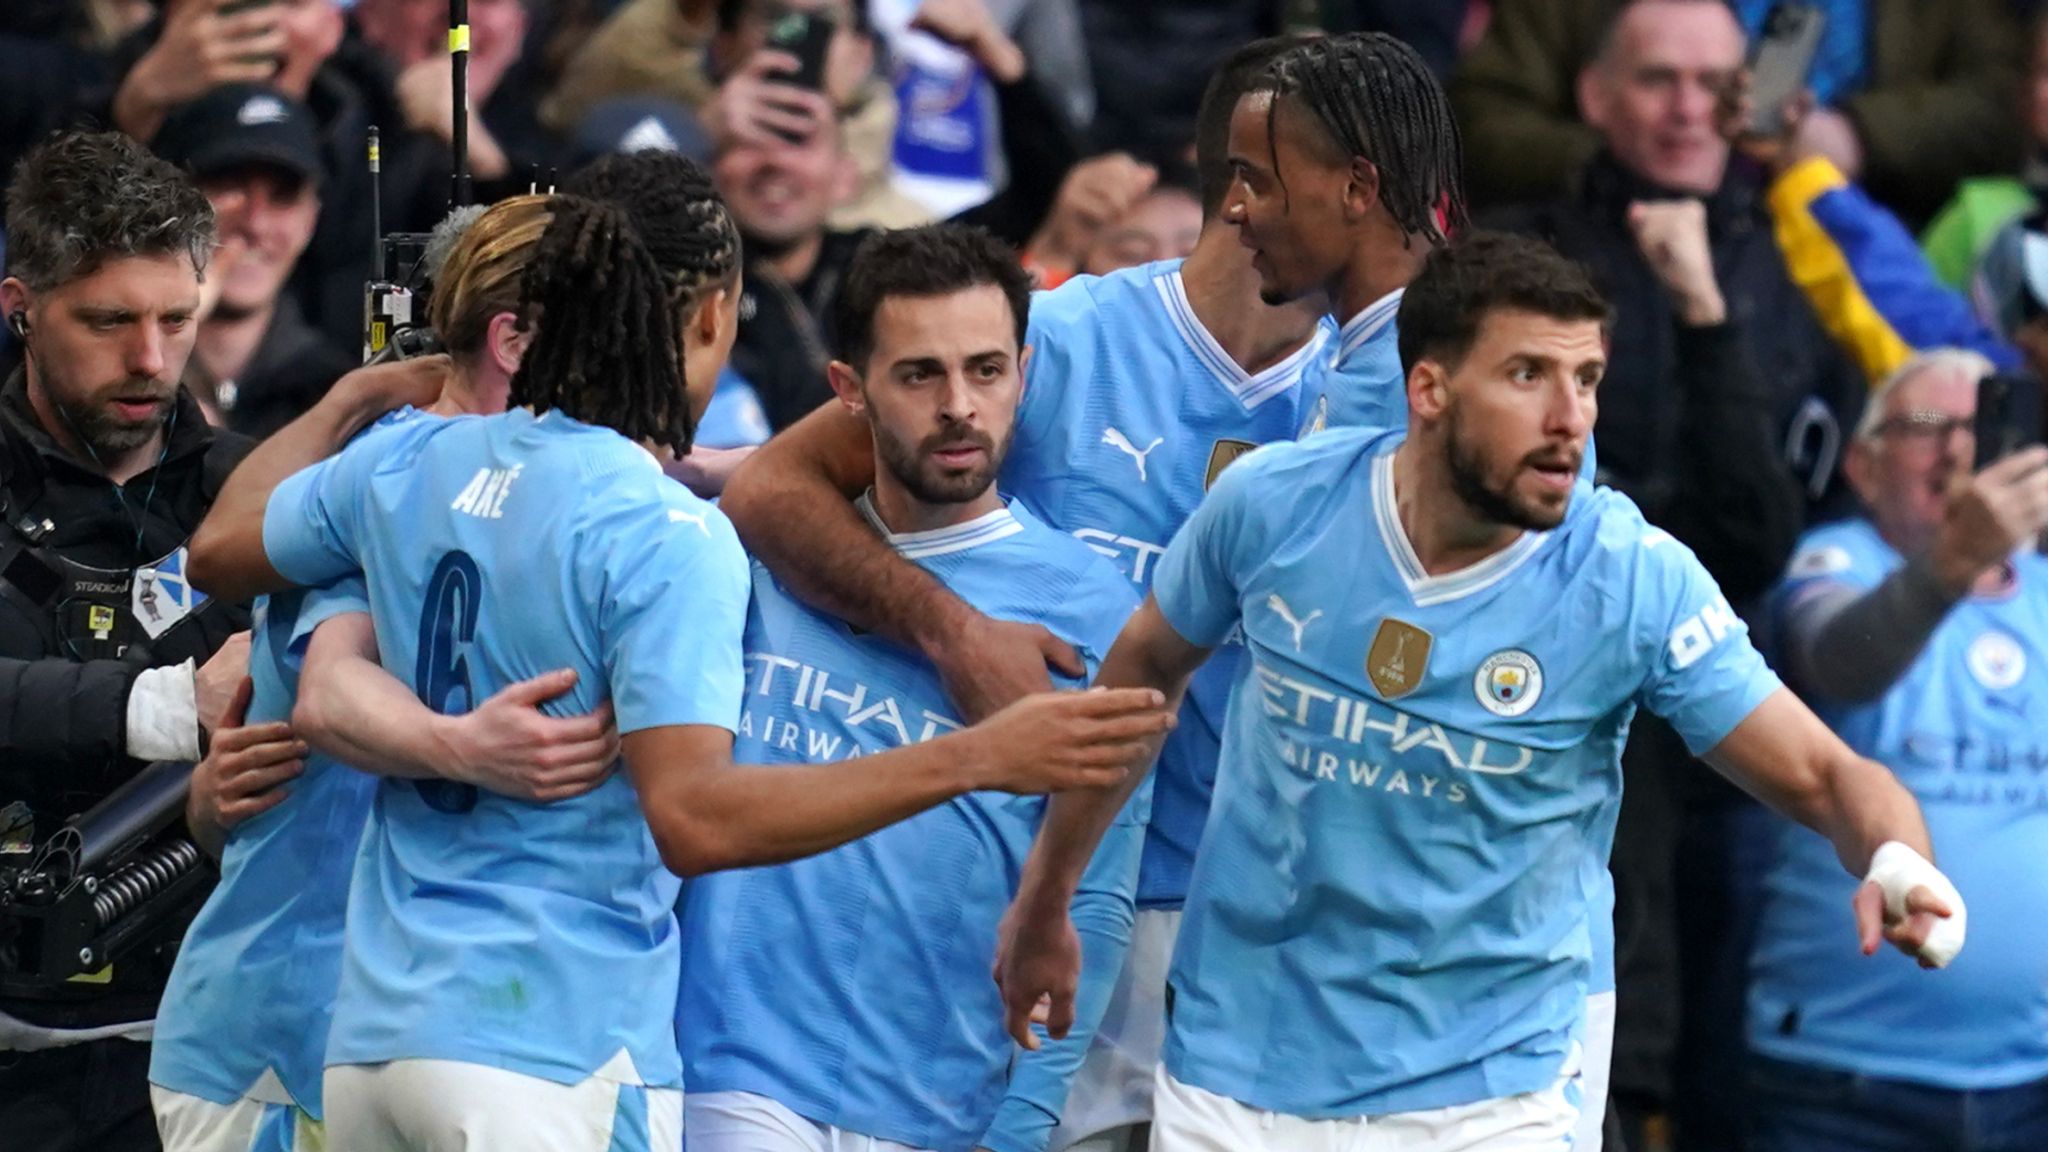 Manchester City secures FA Cup final berth with 1-0 victory over Chelsea